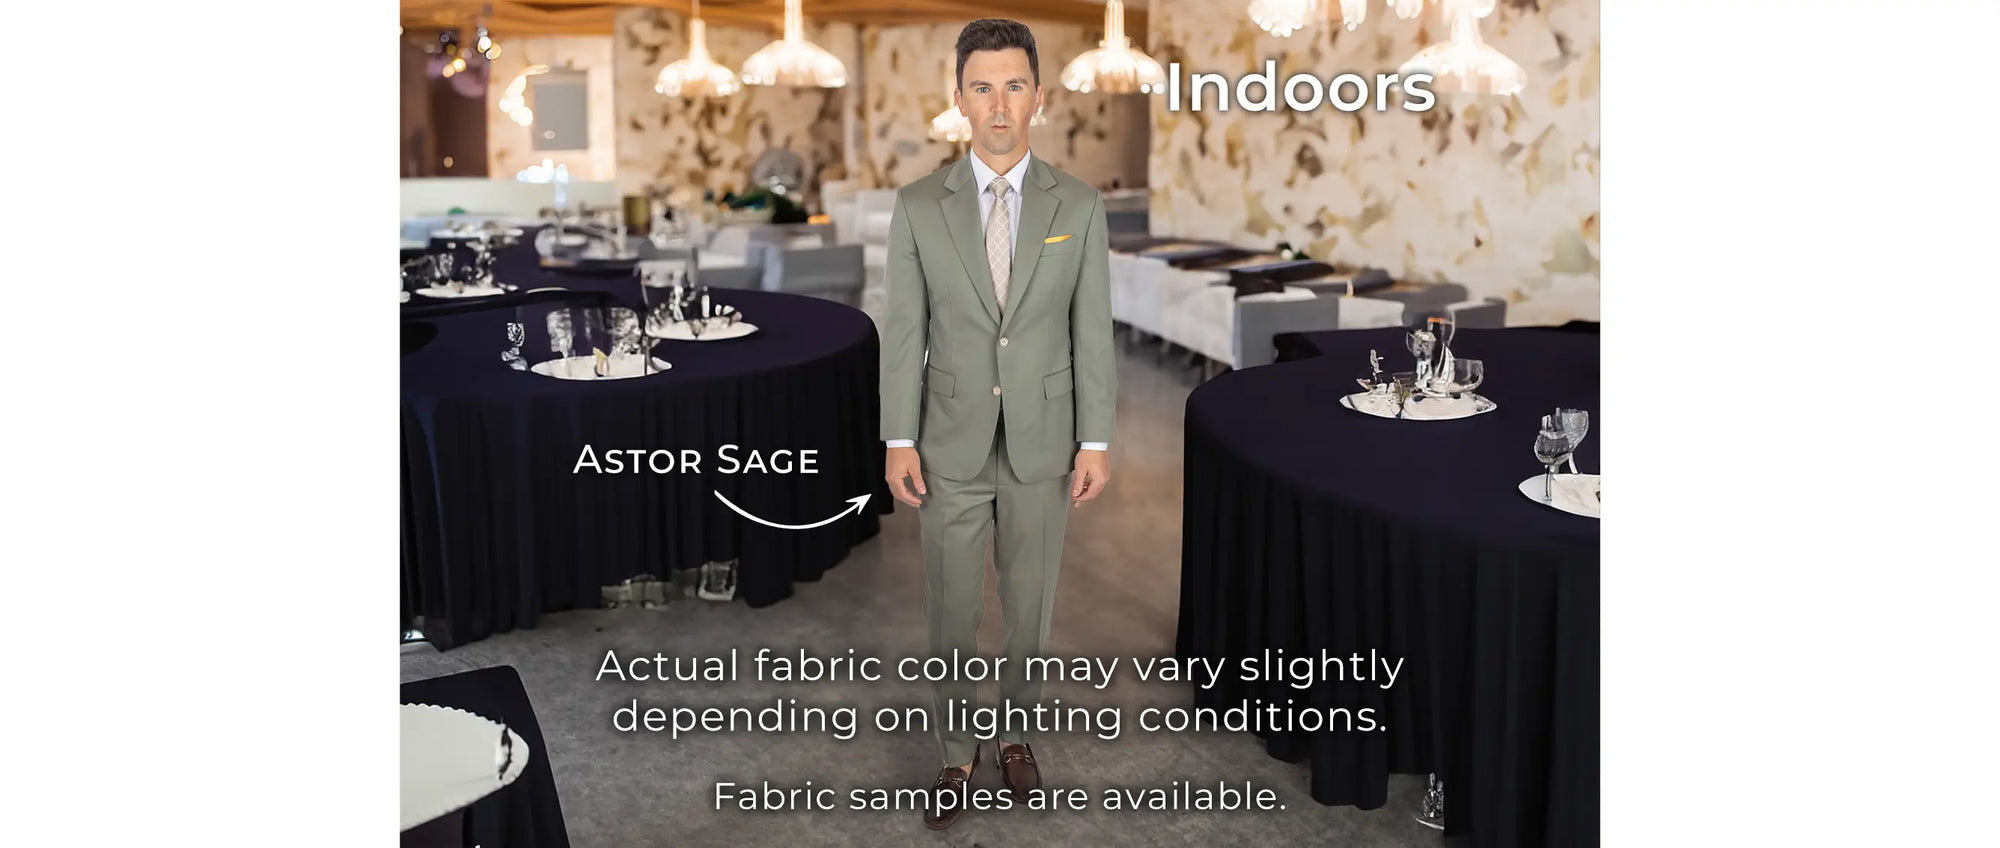 Sage suit indoors showing the color difference from outdoors.